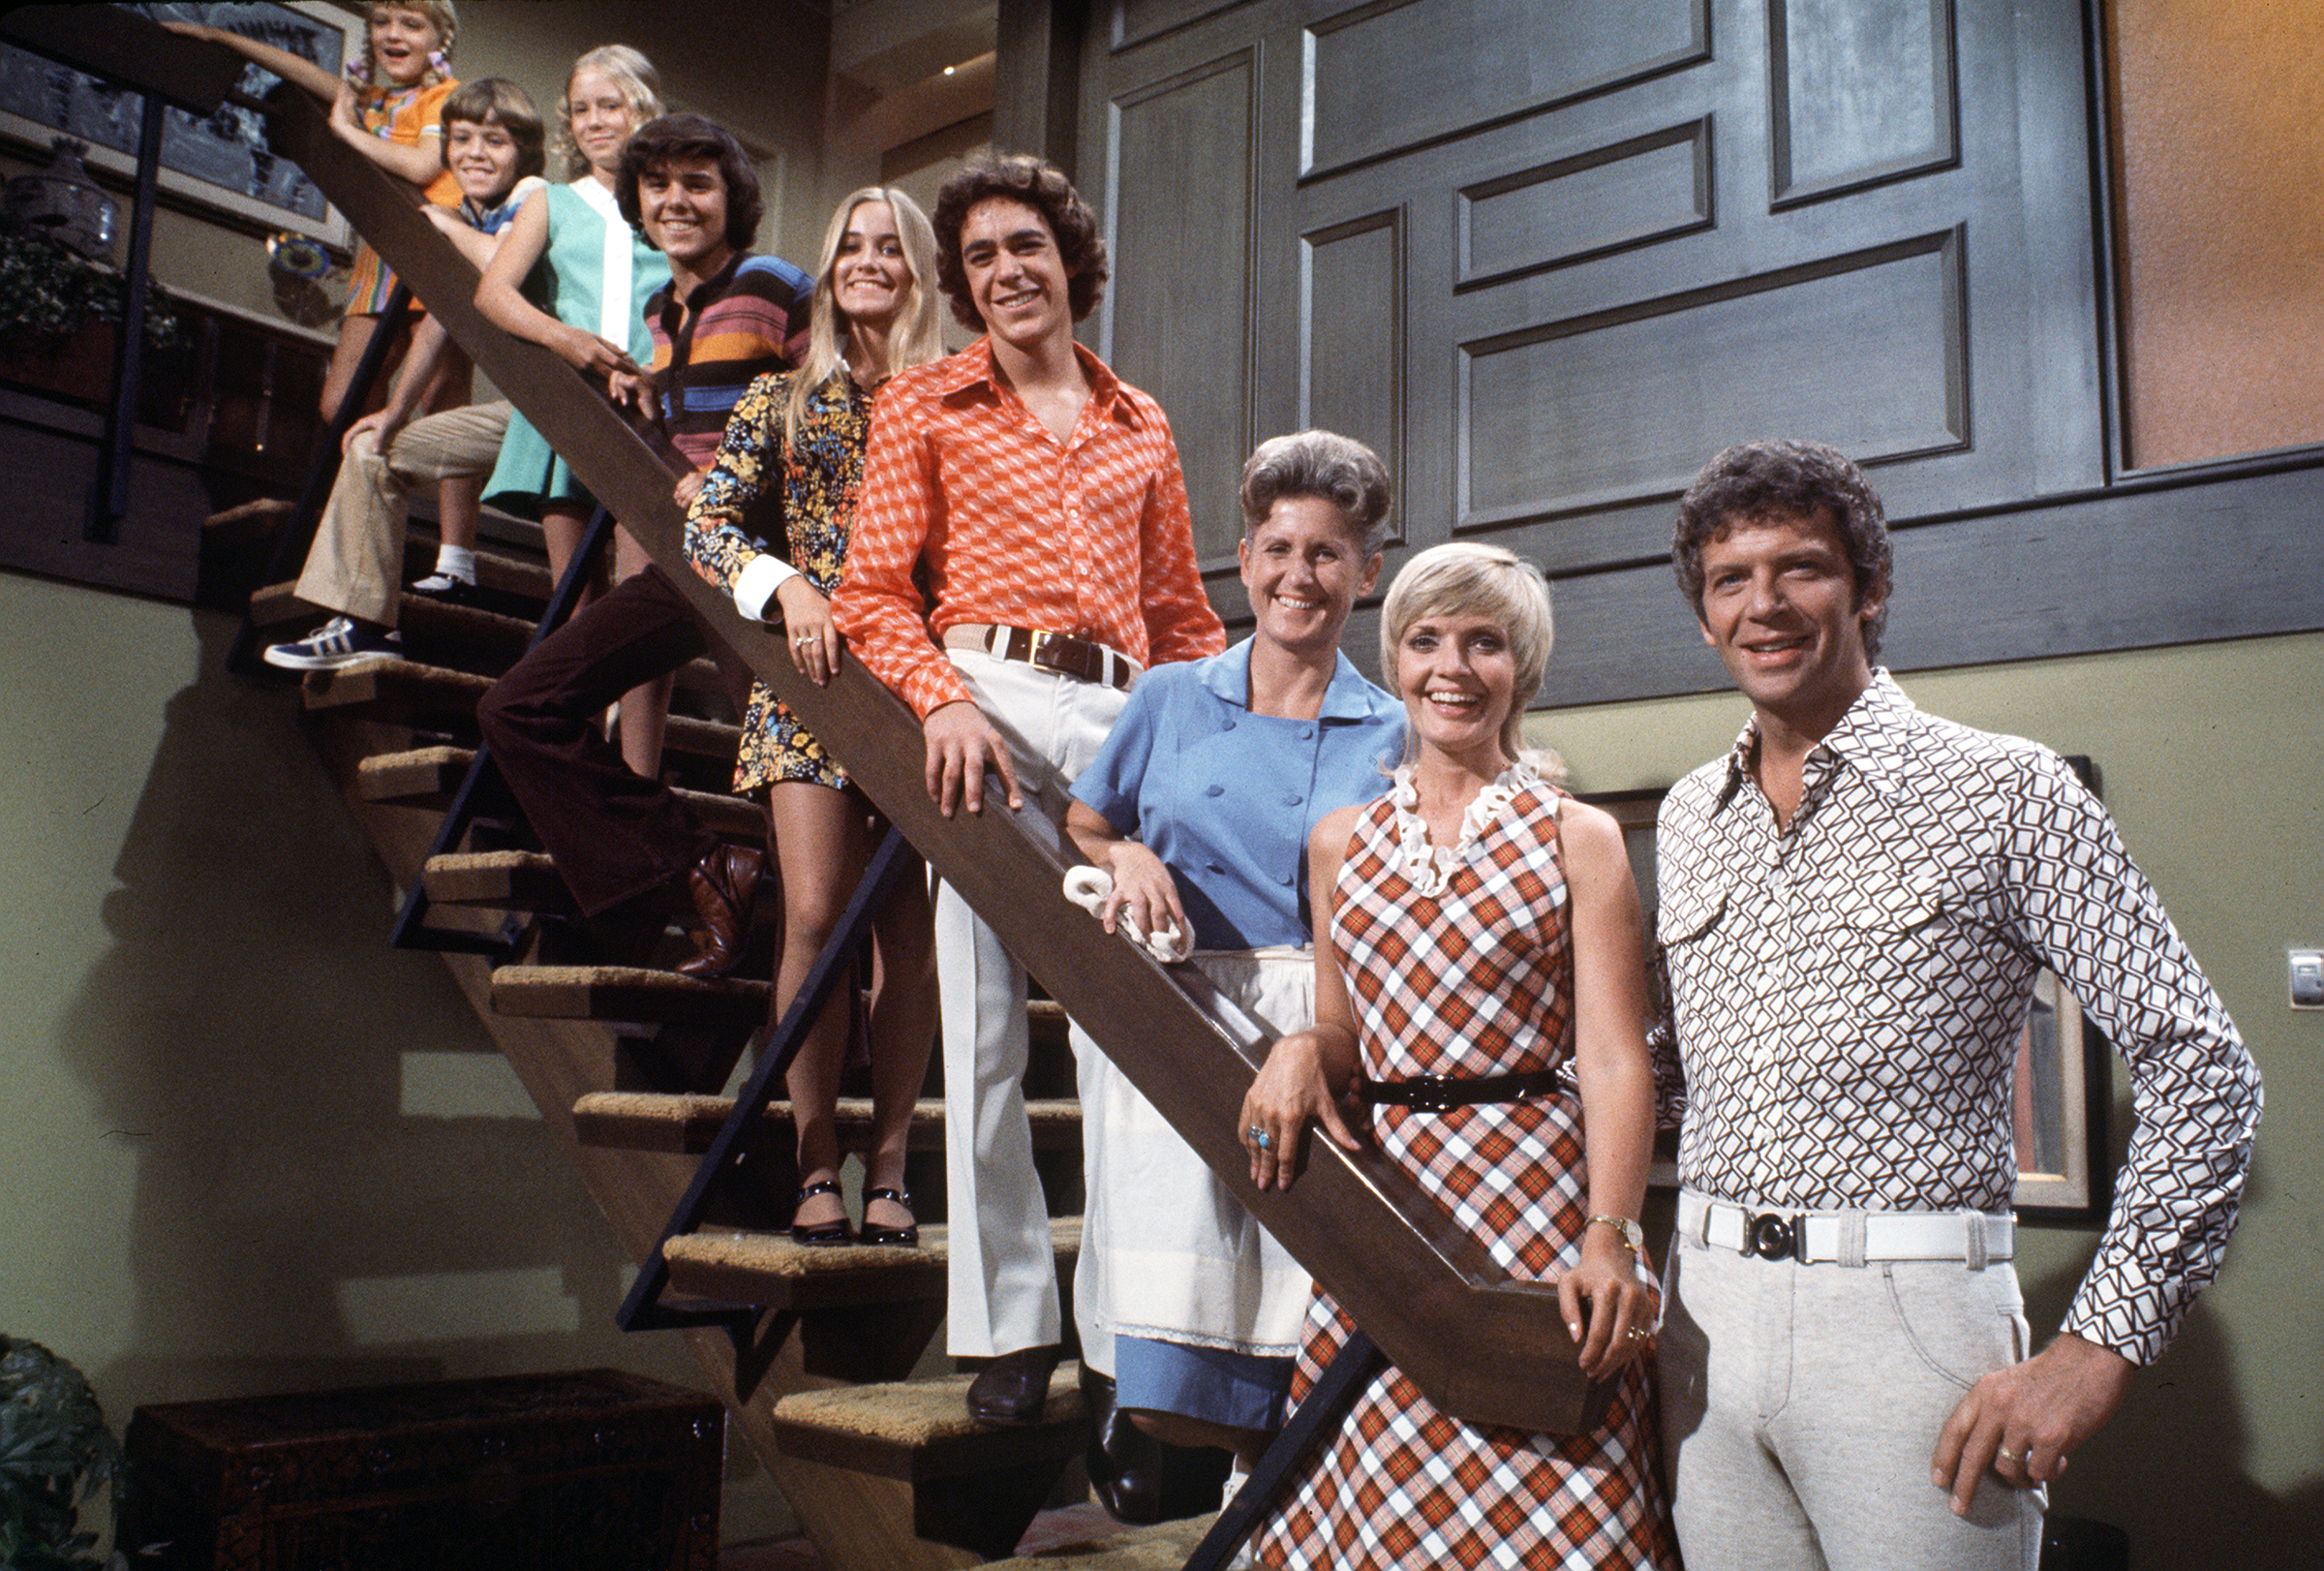 Susan Olsen, Mike Lookinland, Eve Plumb, Christopher Knight, Maureen McCormick, Barry Williams, Ann B. Davis, Florence Henderson, and Robert Reed as their characters from "The Brady Bunch" in 1969 | Source: Getty Images